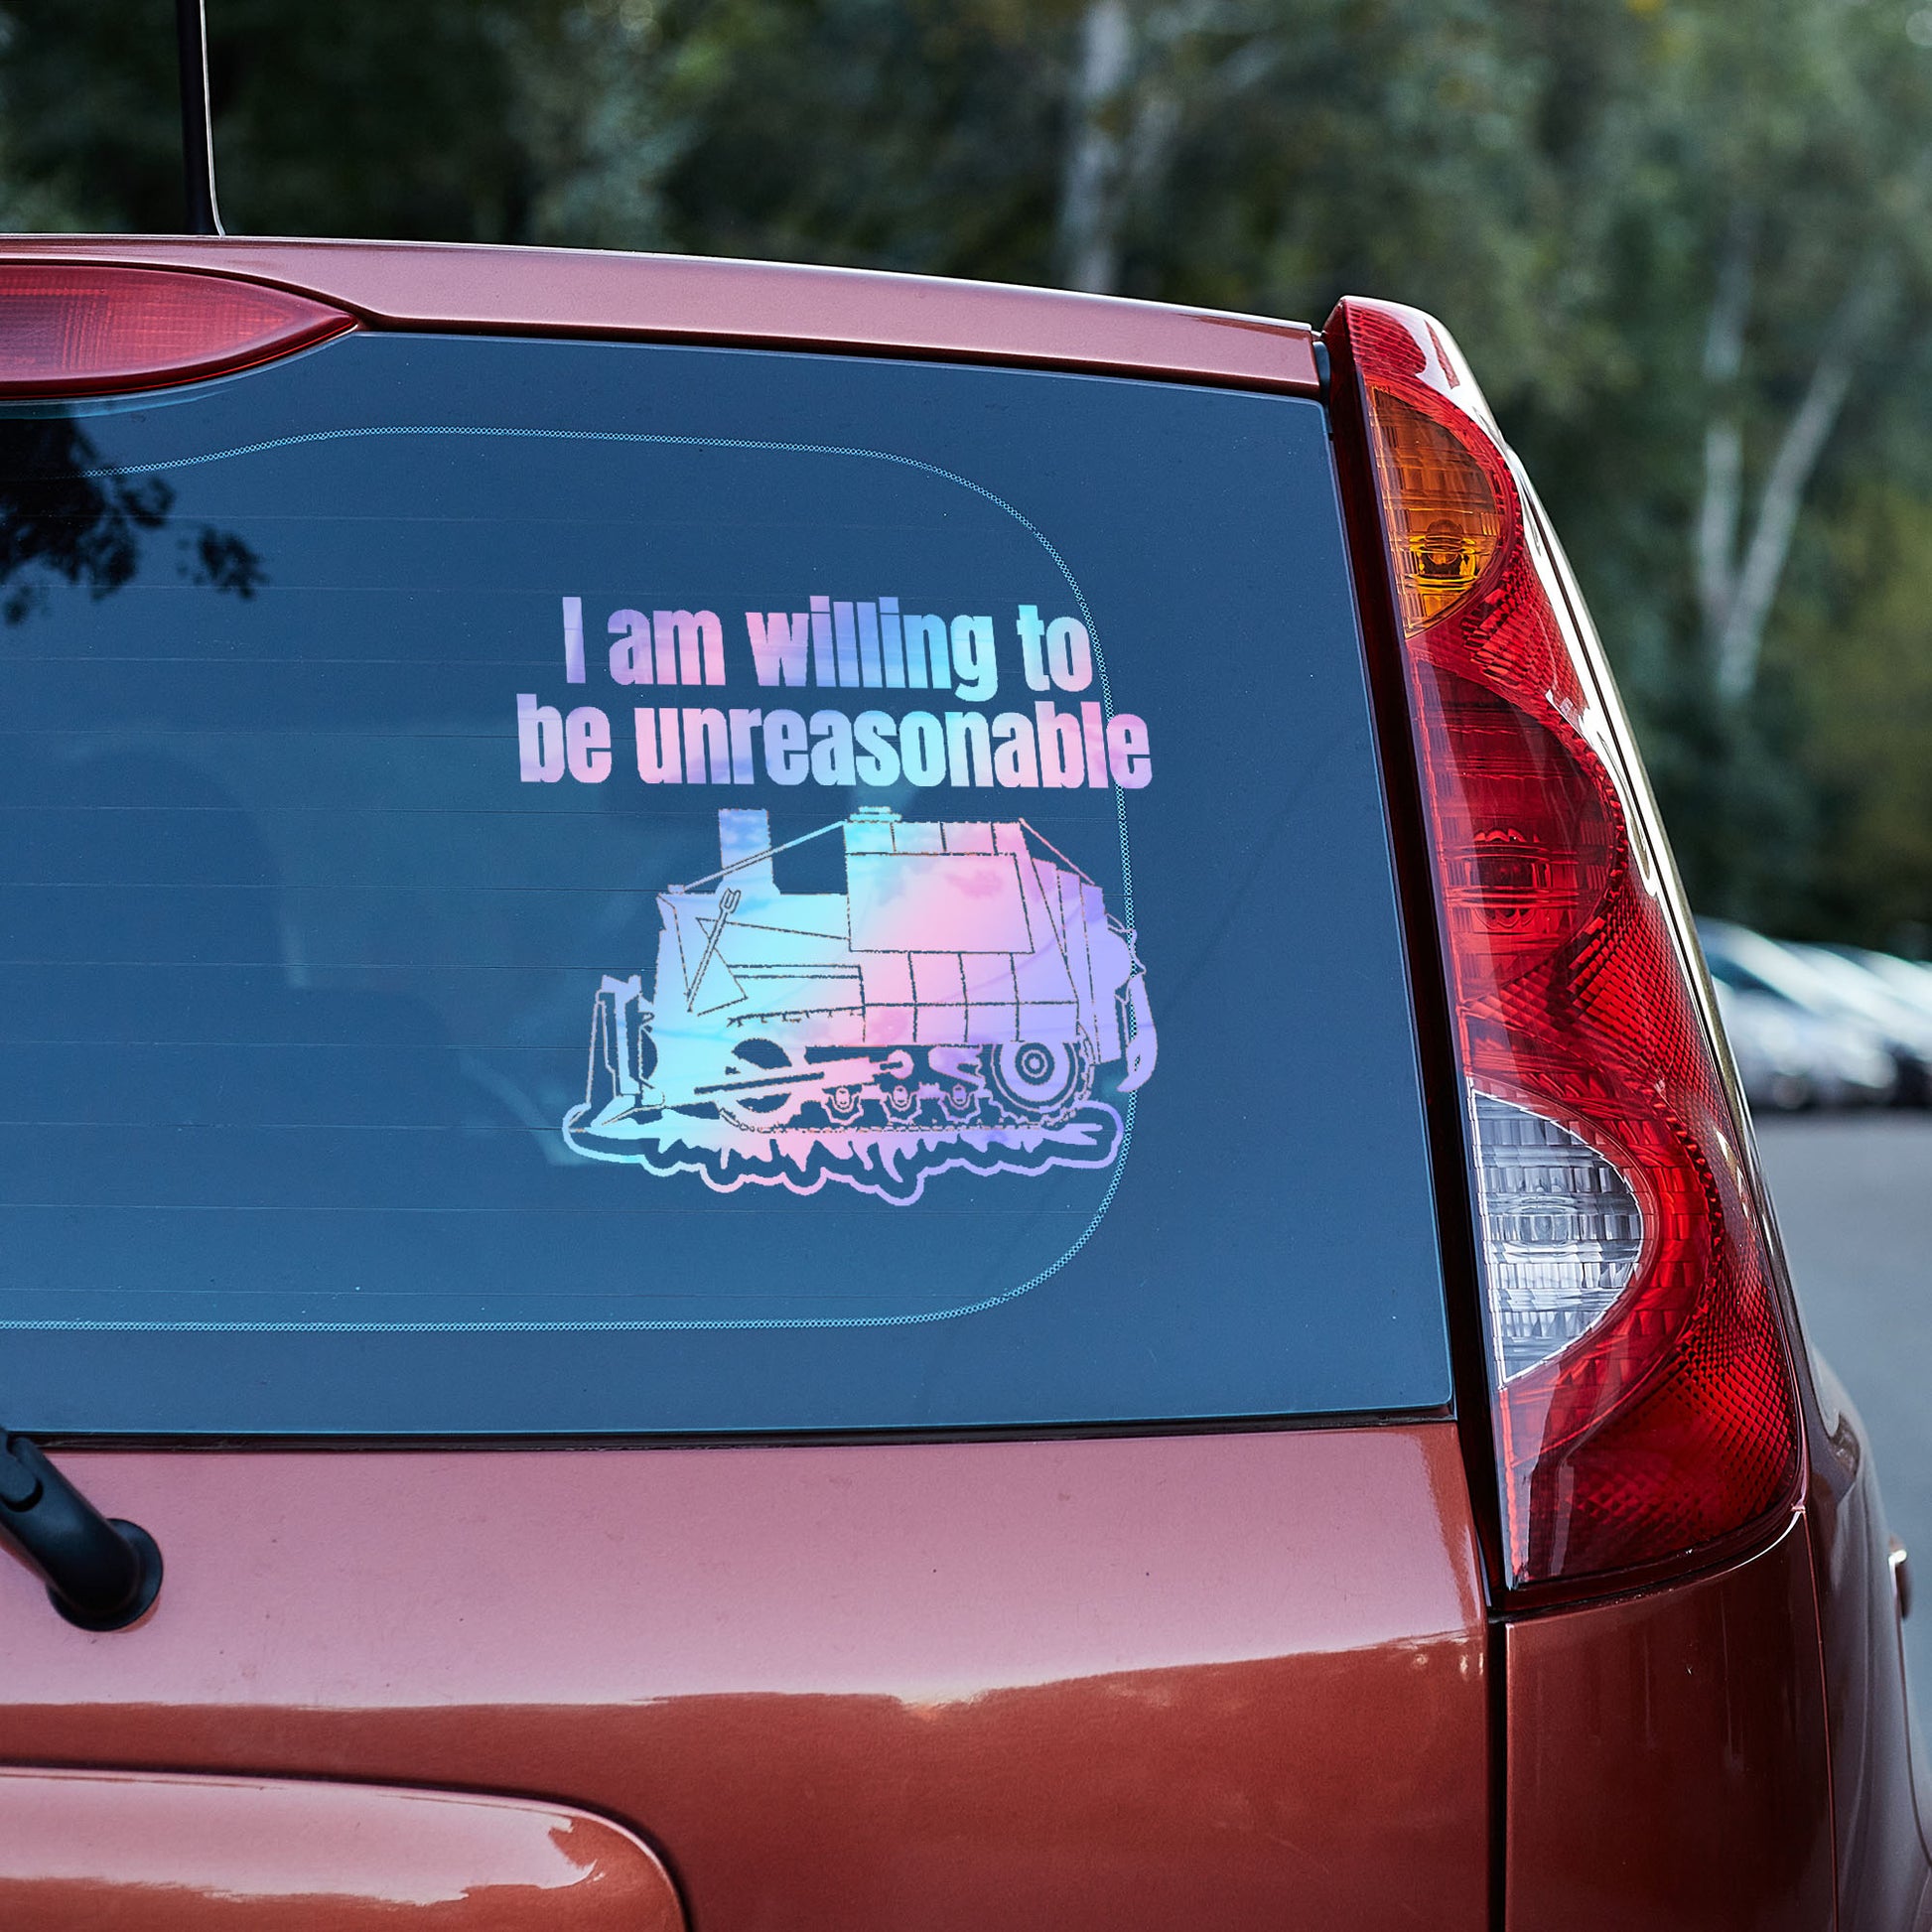 I am willing to be unreasonable Vinyl decal boss gift car decor dads day gift gift for dad gift for grandpa gift for her gift for him gift for husband gift for mom gift for sister gift for wife moms gift Unique gift Vinyl Vinyl decals vinyl sticker Vinyl stickers window decal window sticker